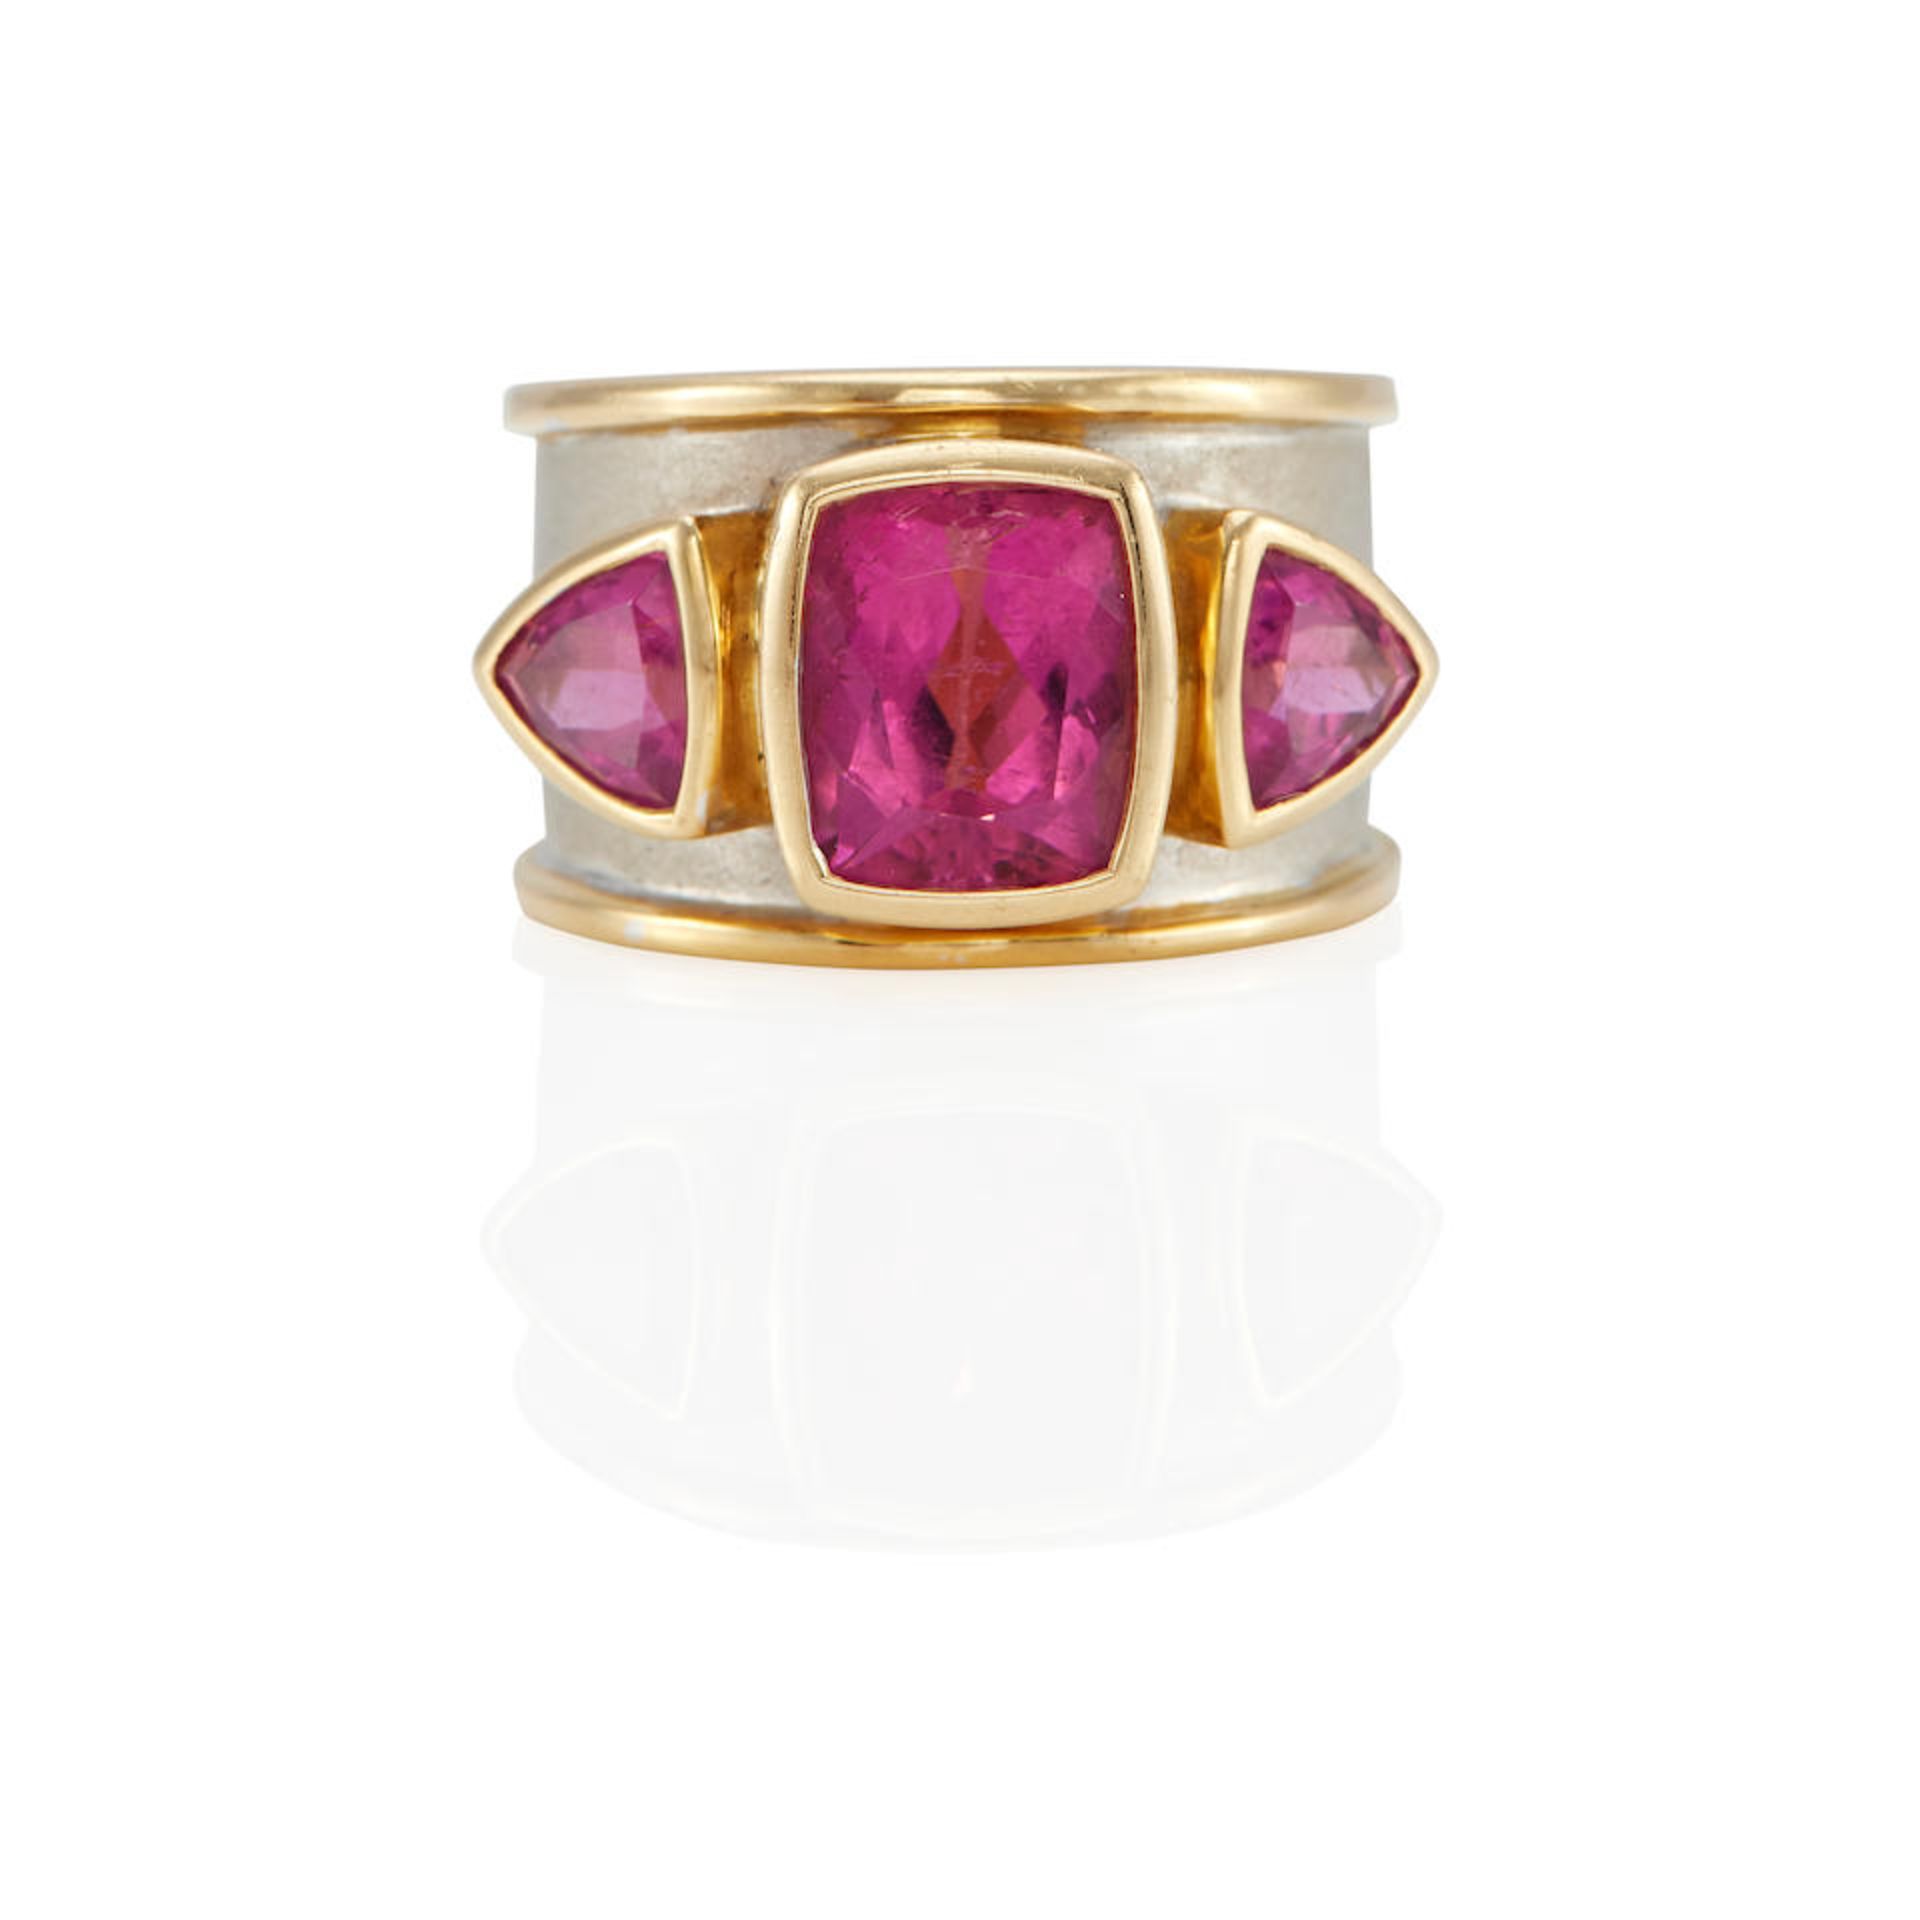 AN 18K BI-COLOR GOLD AND TOURMALINE RING